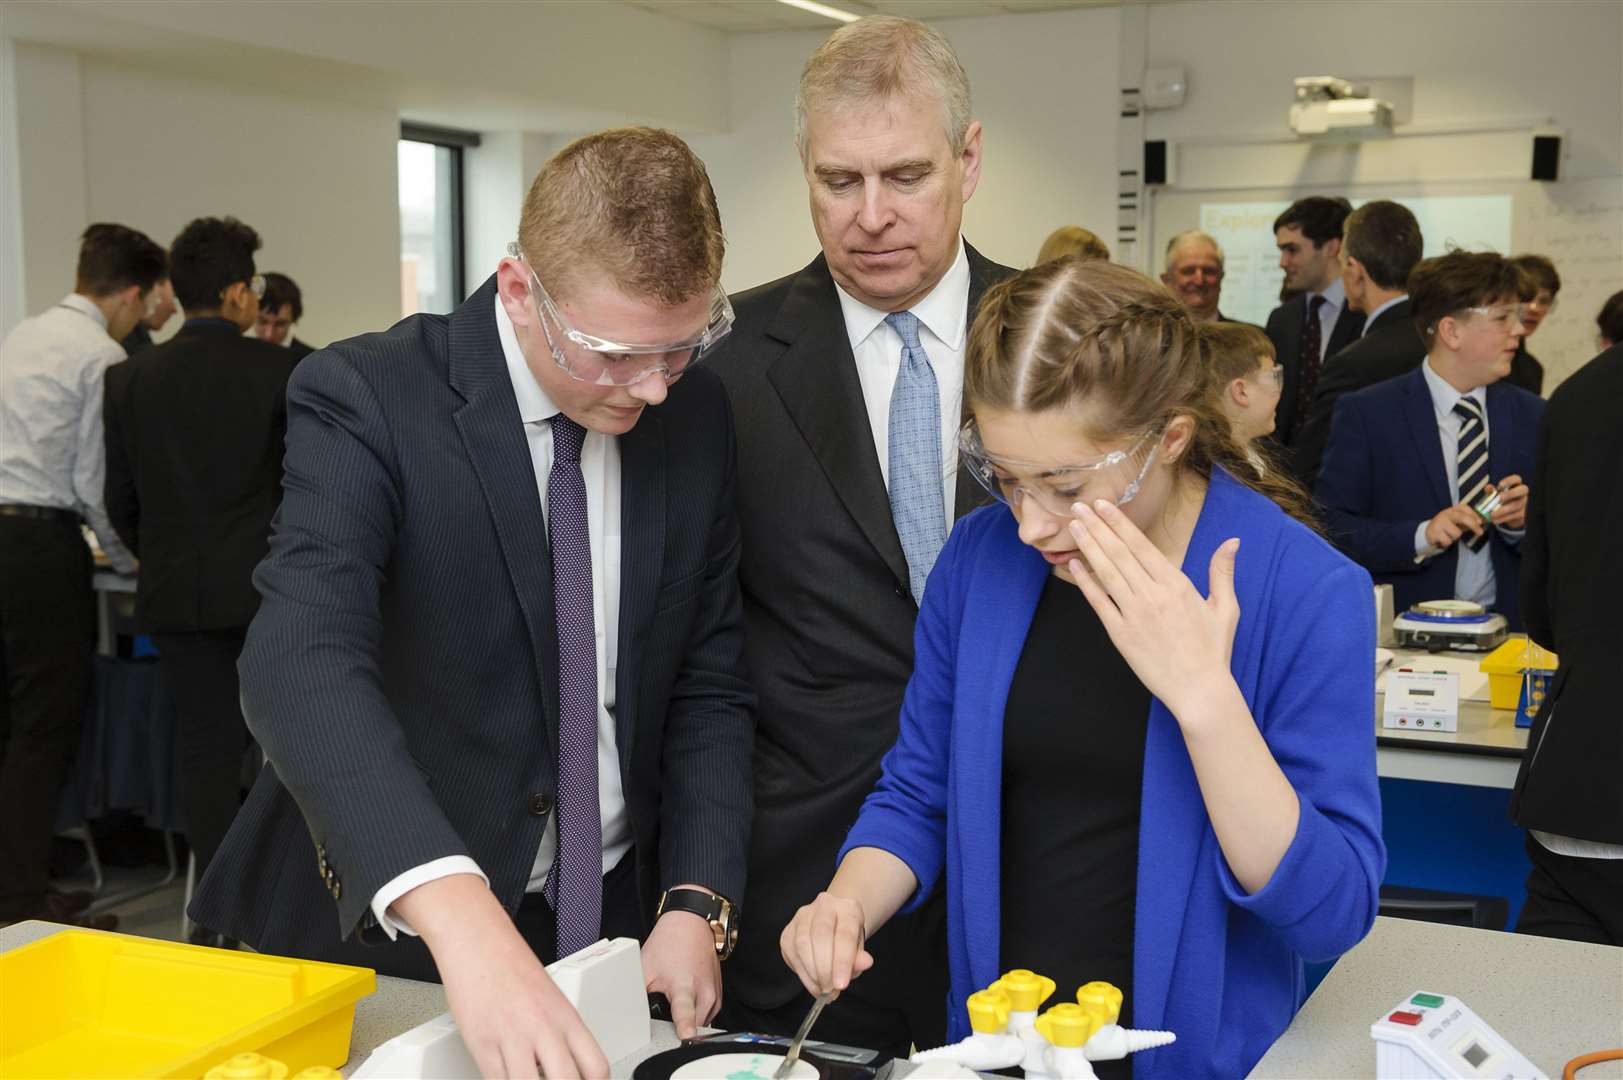 Pupils at the Waterfront UTC, then known as Medway UTC, show the Duke of York their work at its official opening in 2016. Picture: Andy Payton